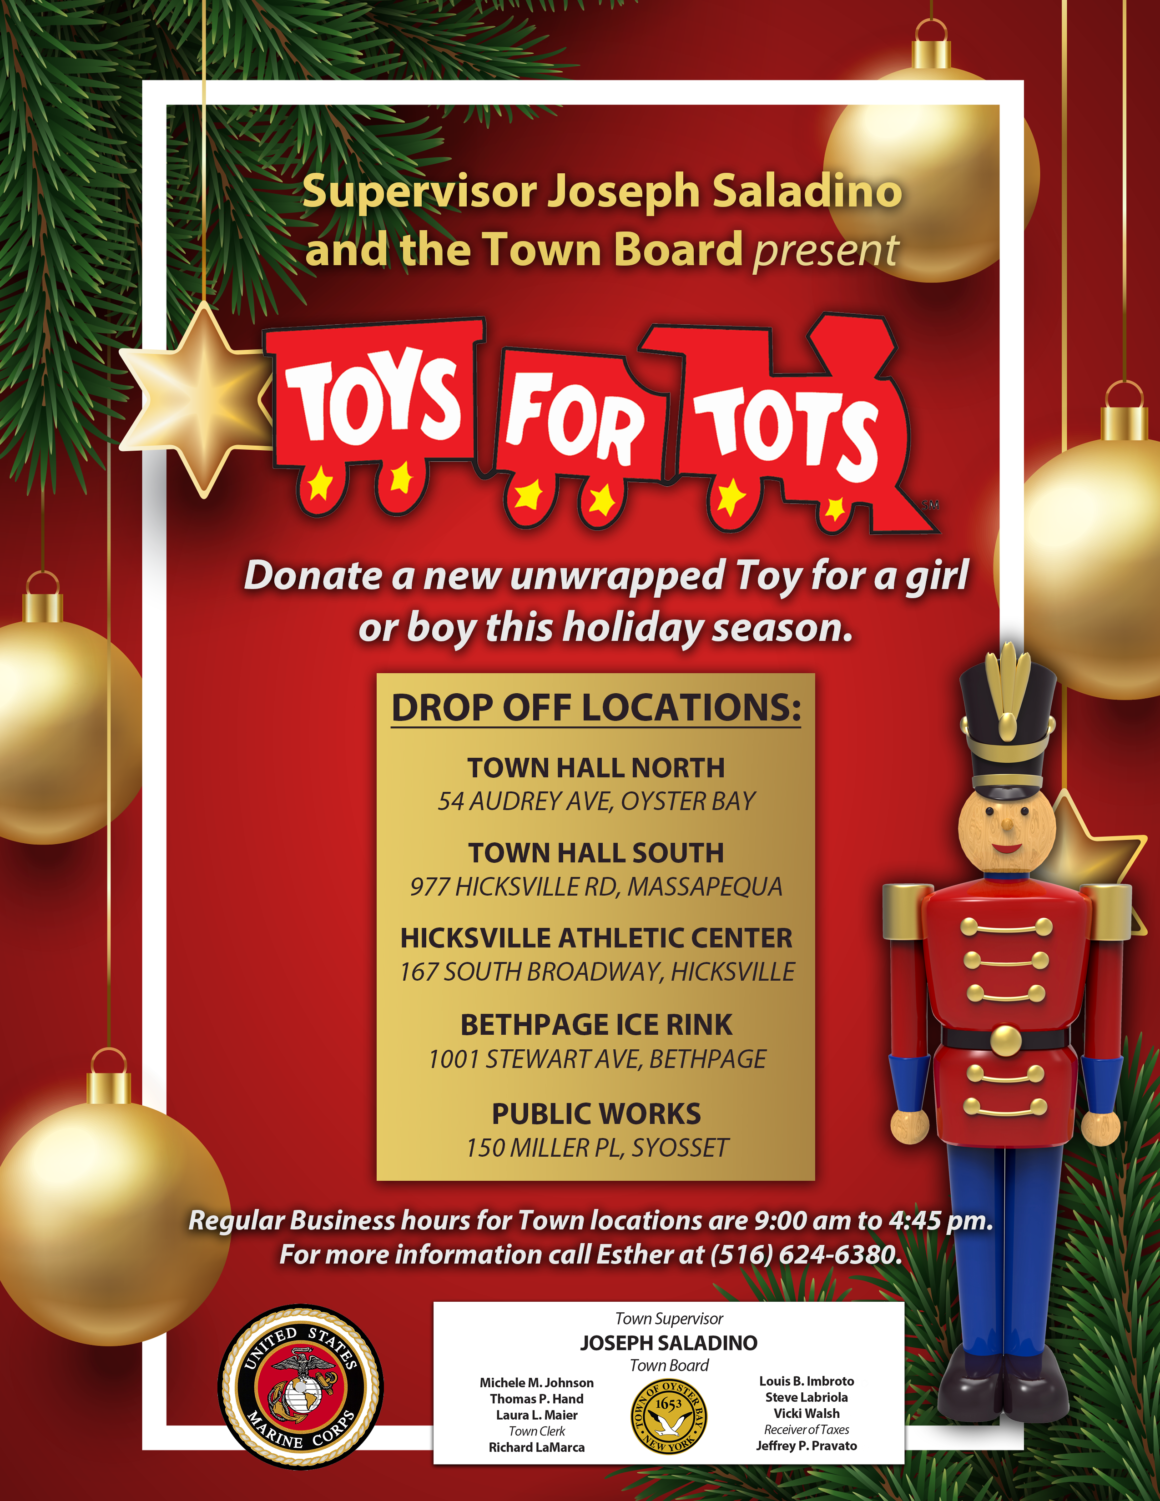 Town Kicks Off Massive Toys for Tots Collection Drive Helping Families Impacted by COVID Pandemic